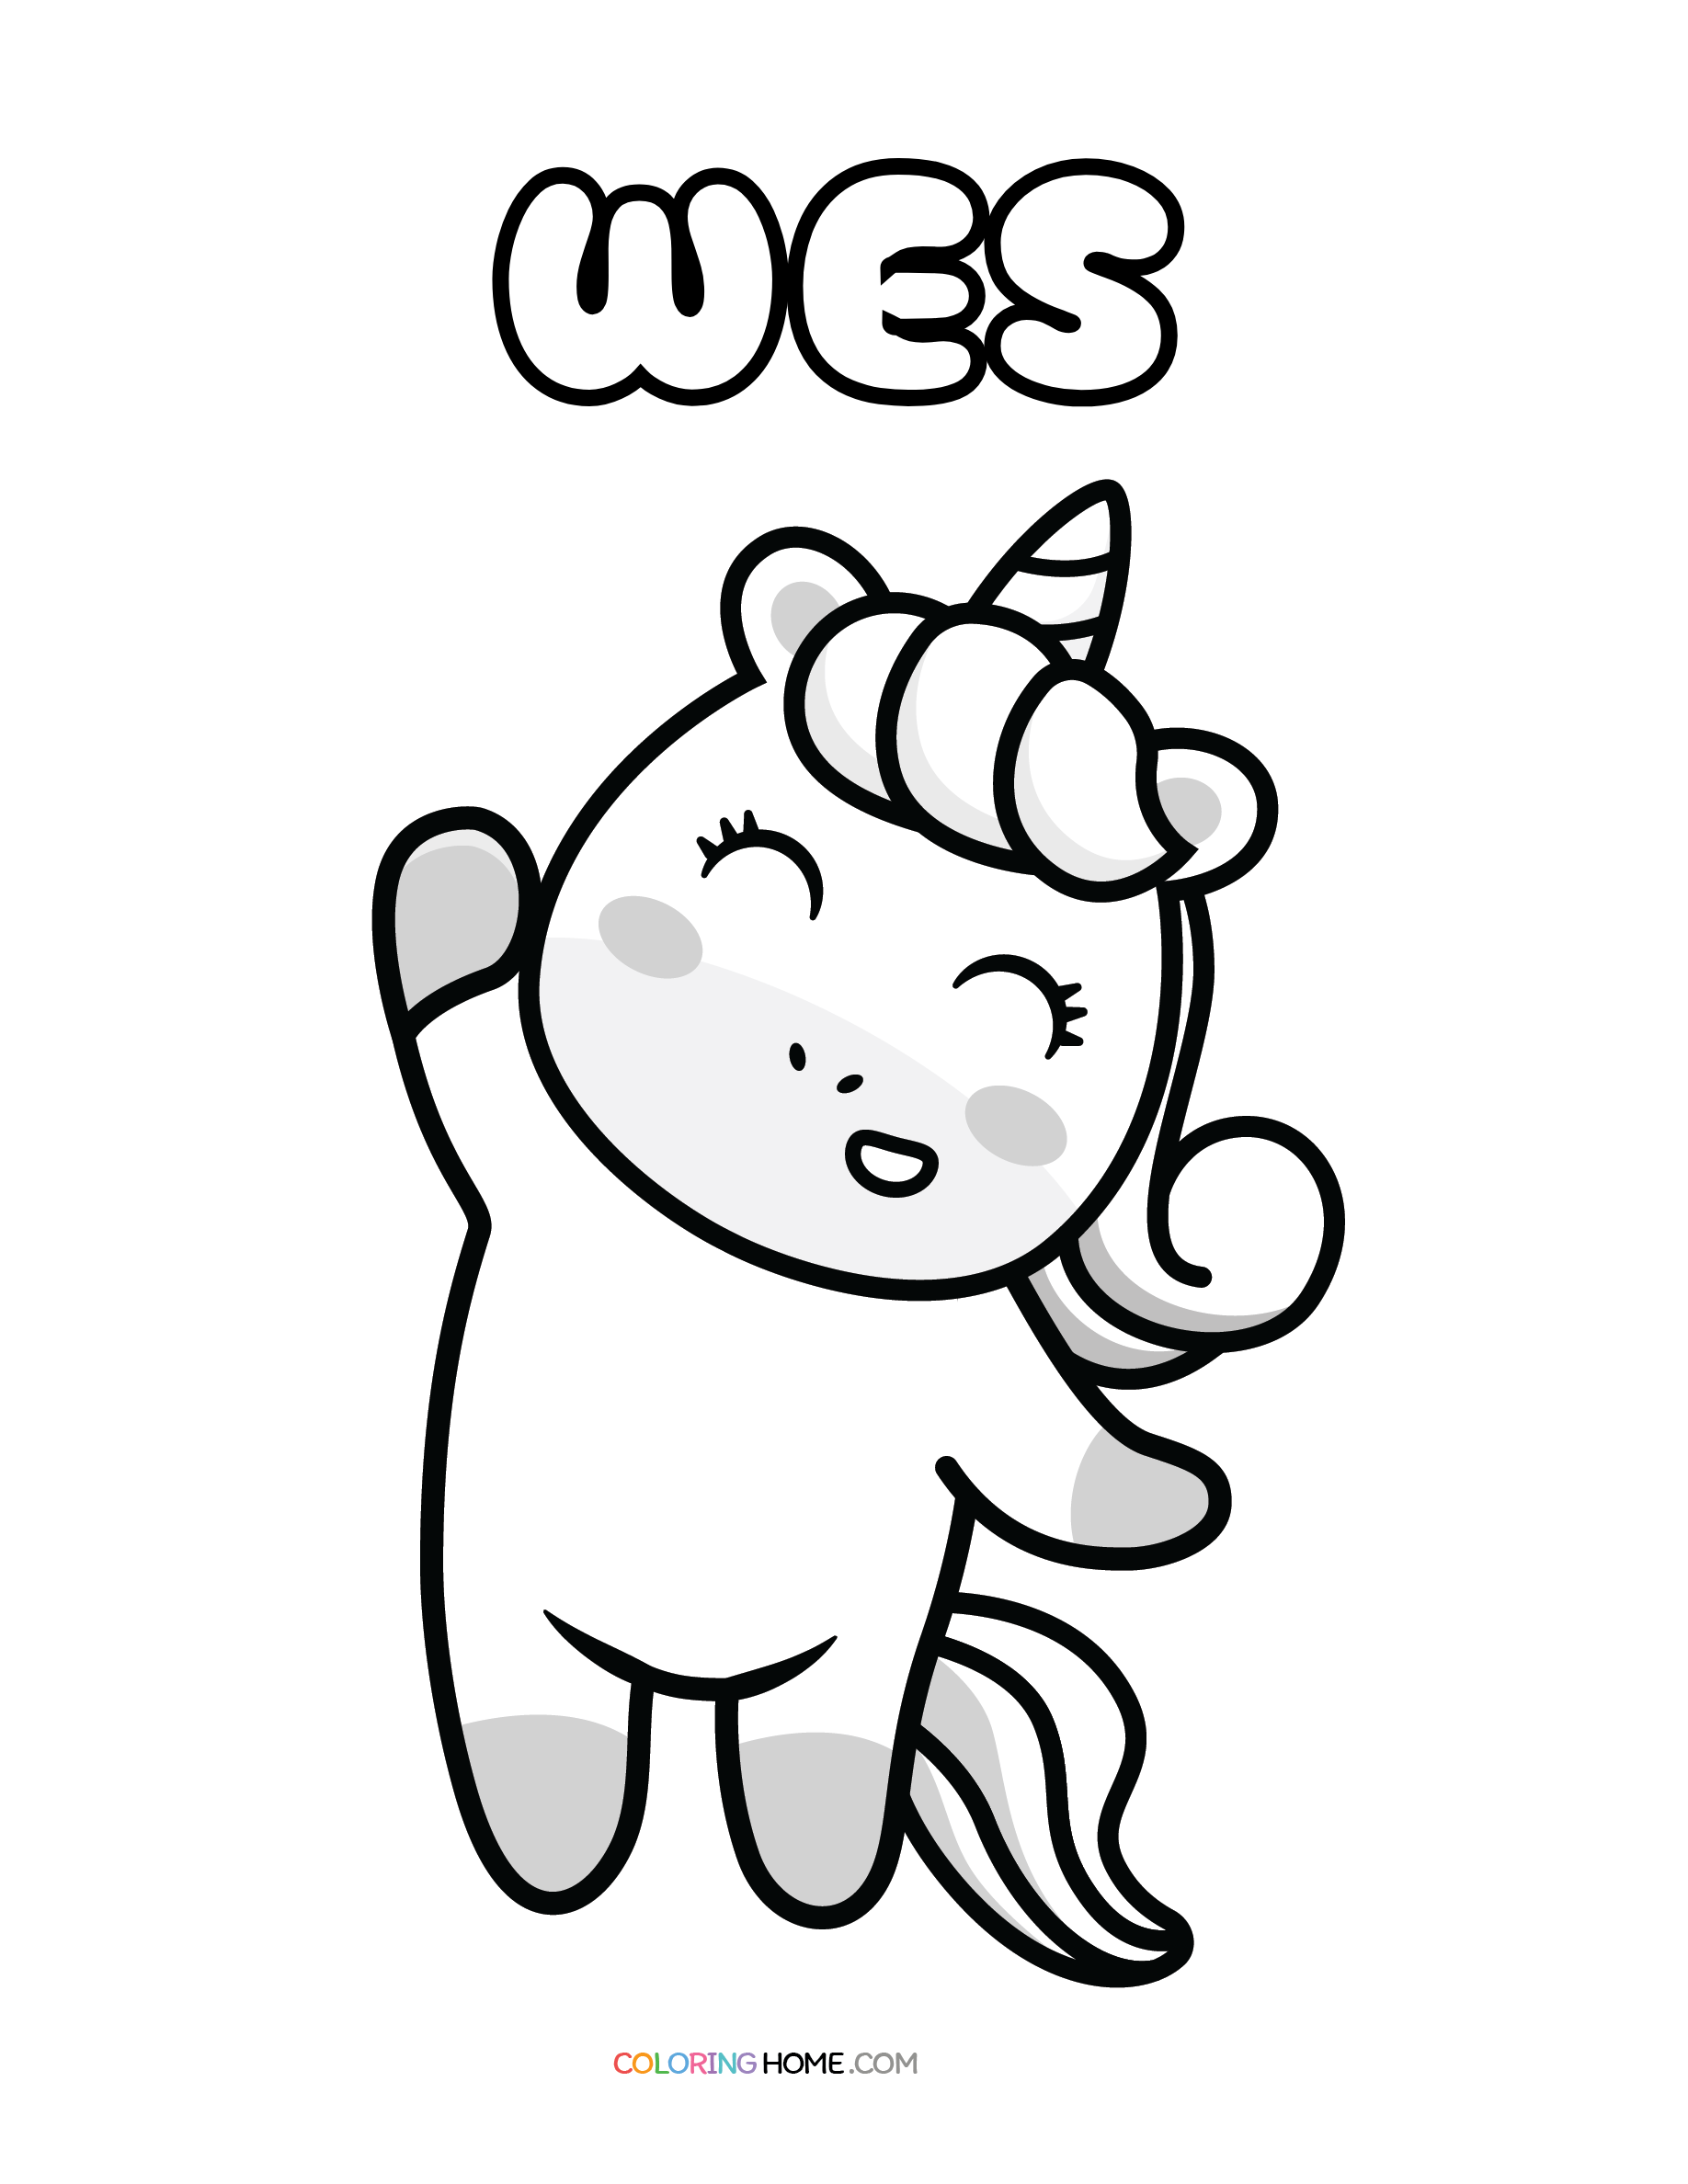 Wes unicorn coloring page